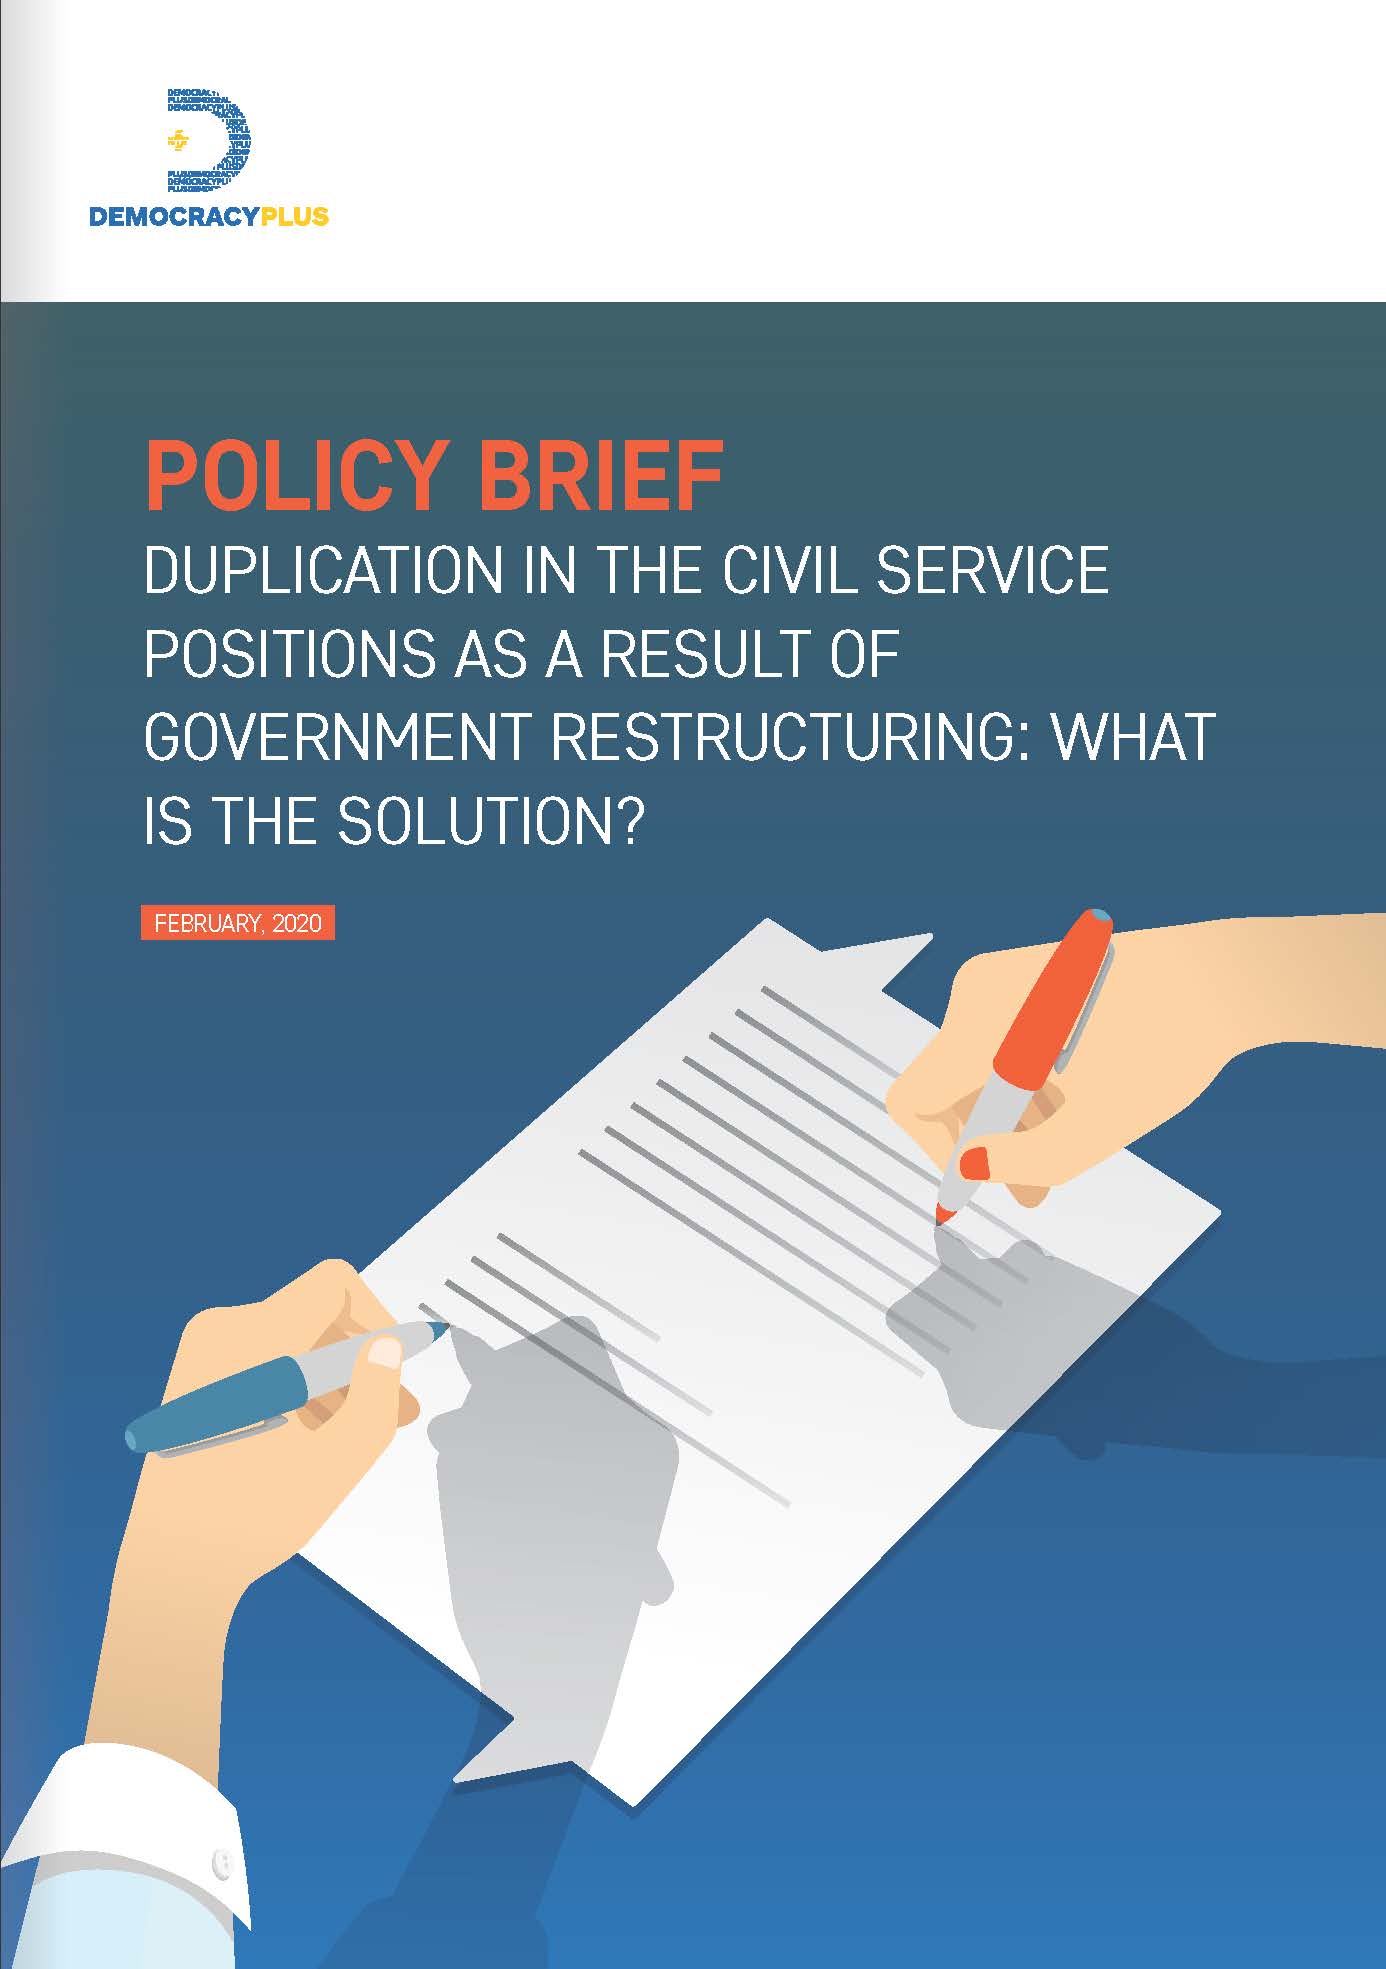 Policy brief duplication in the civil service positions as a result of government restructuring: what is the solution?